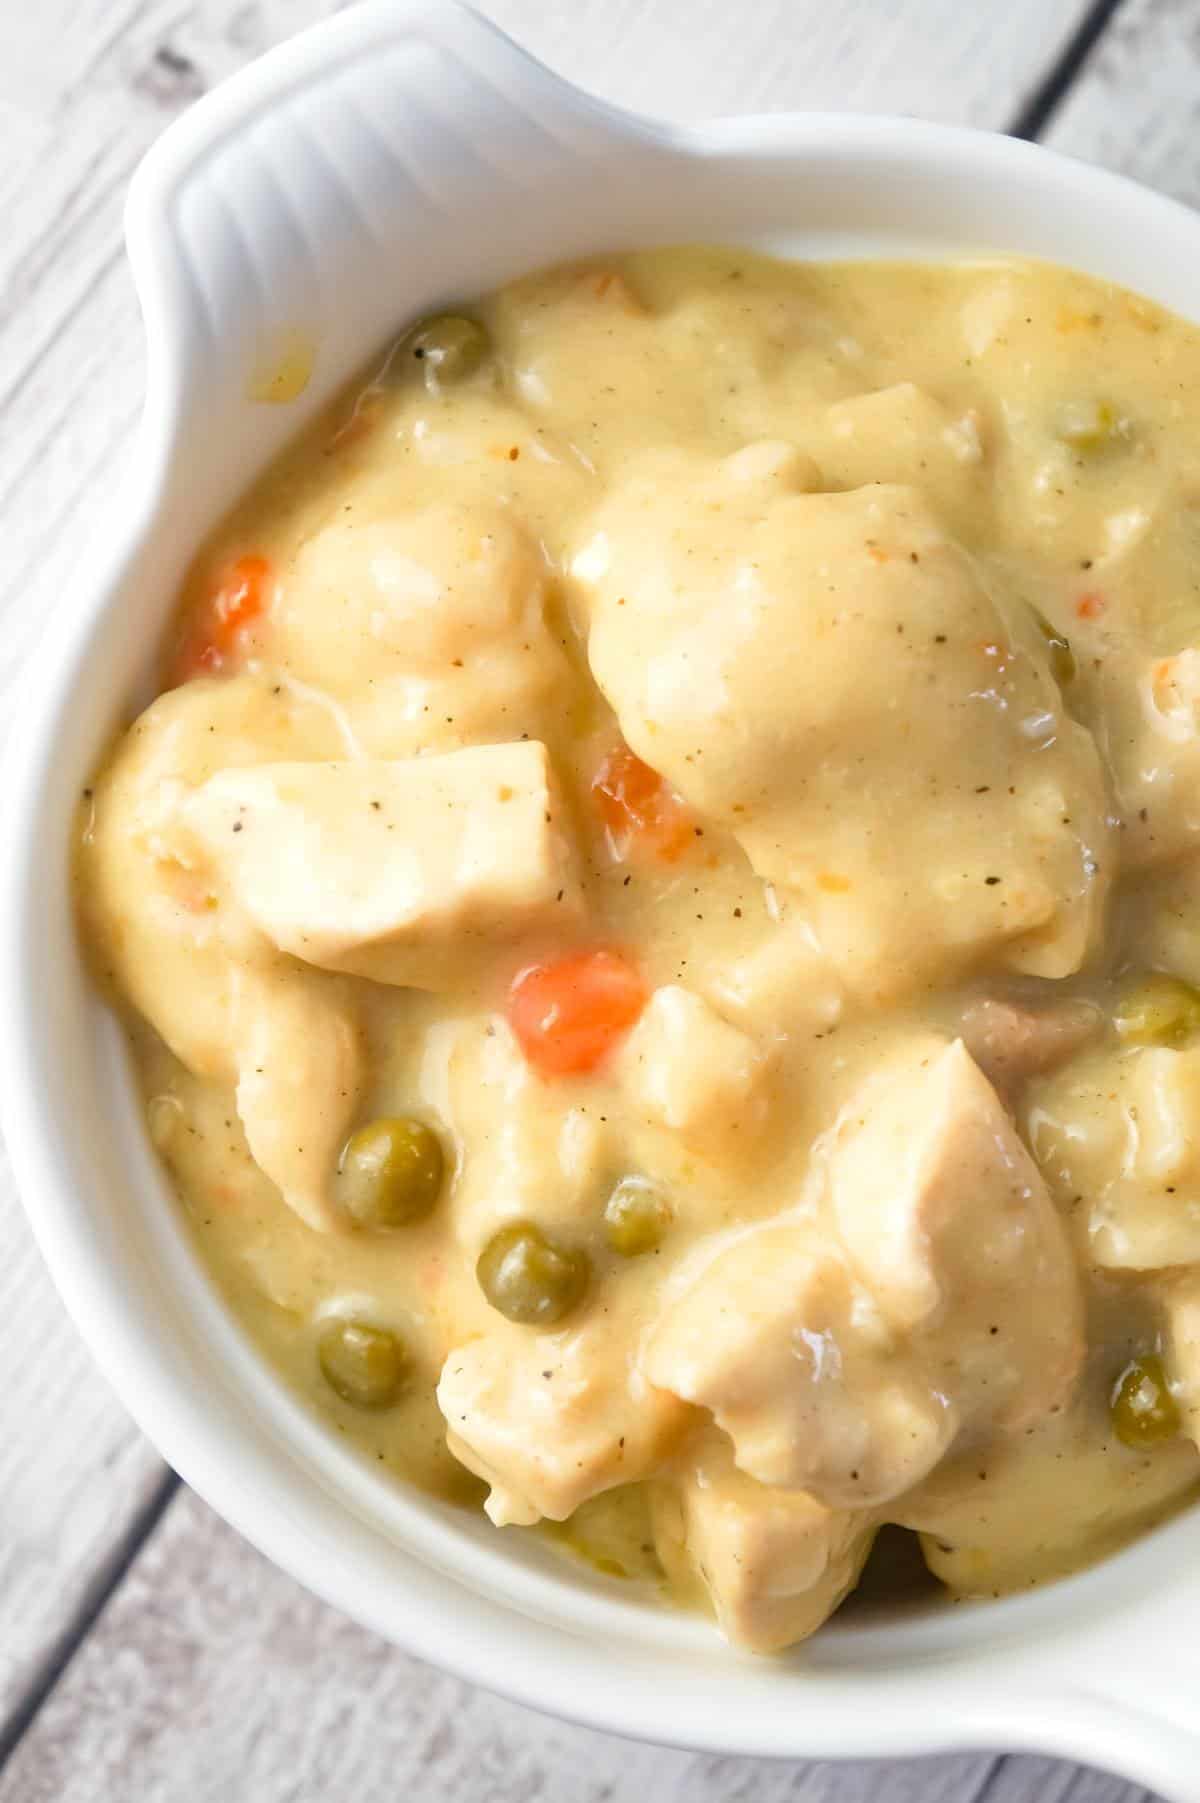 Instant Pot Chicken and Dumplings with Biscuits is an easy dump and start recipe using boneless, skinless chicken breasts, cream of chicken soup, Pillsbury refrigerated biscuits and canned peas and carrots.